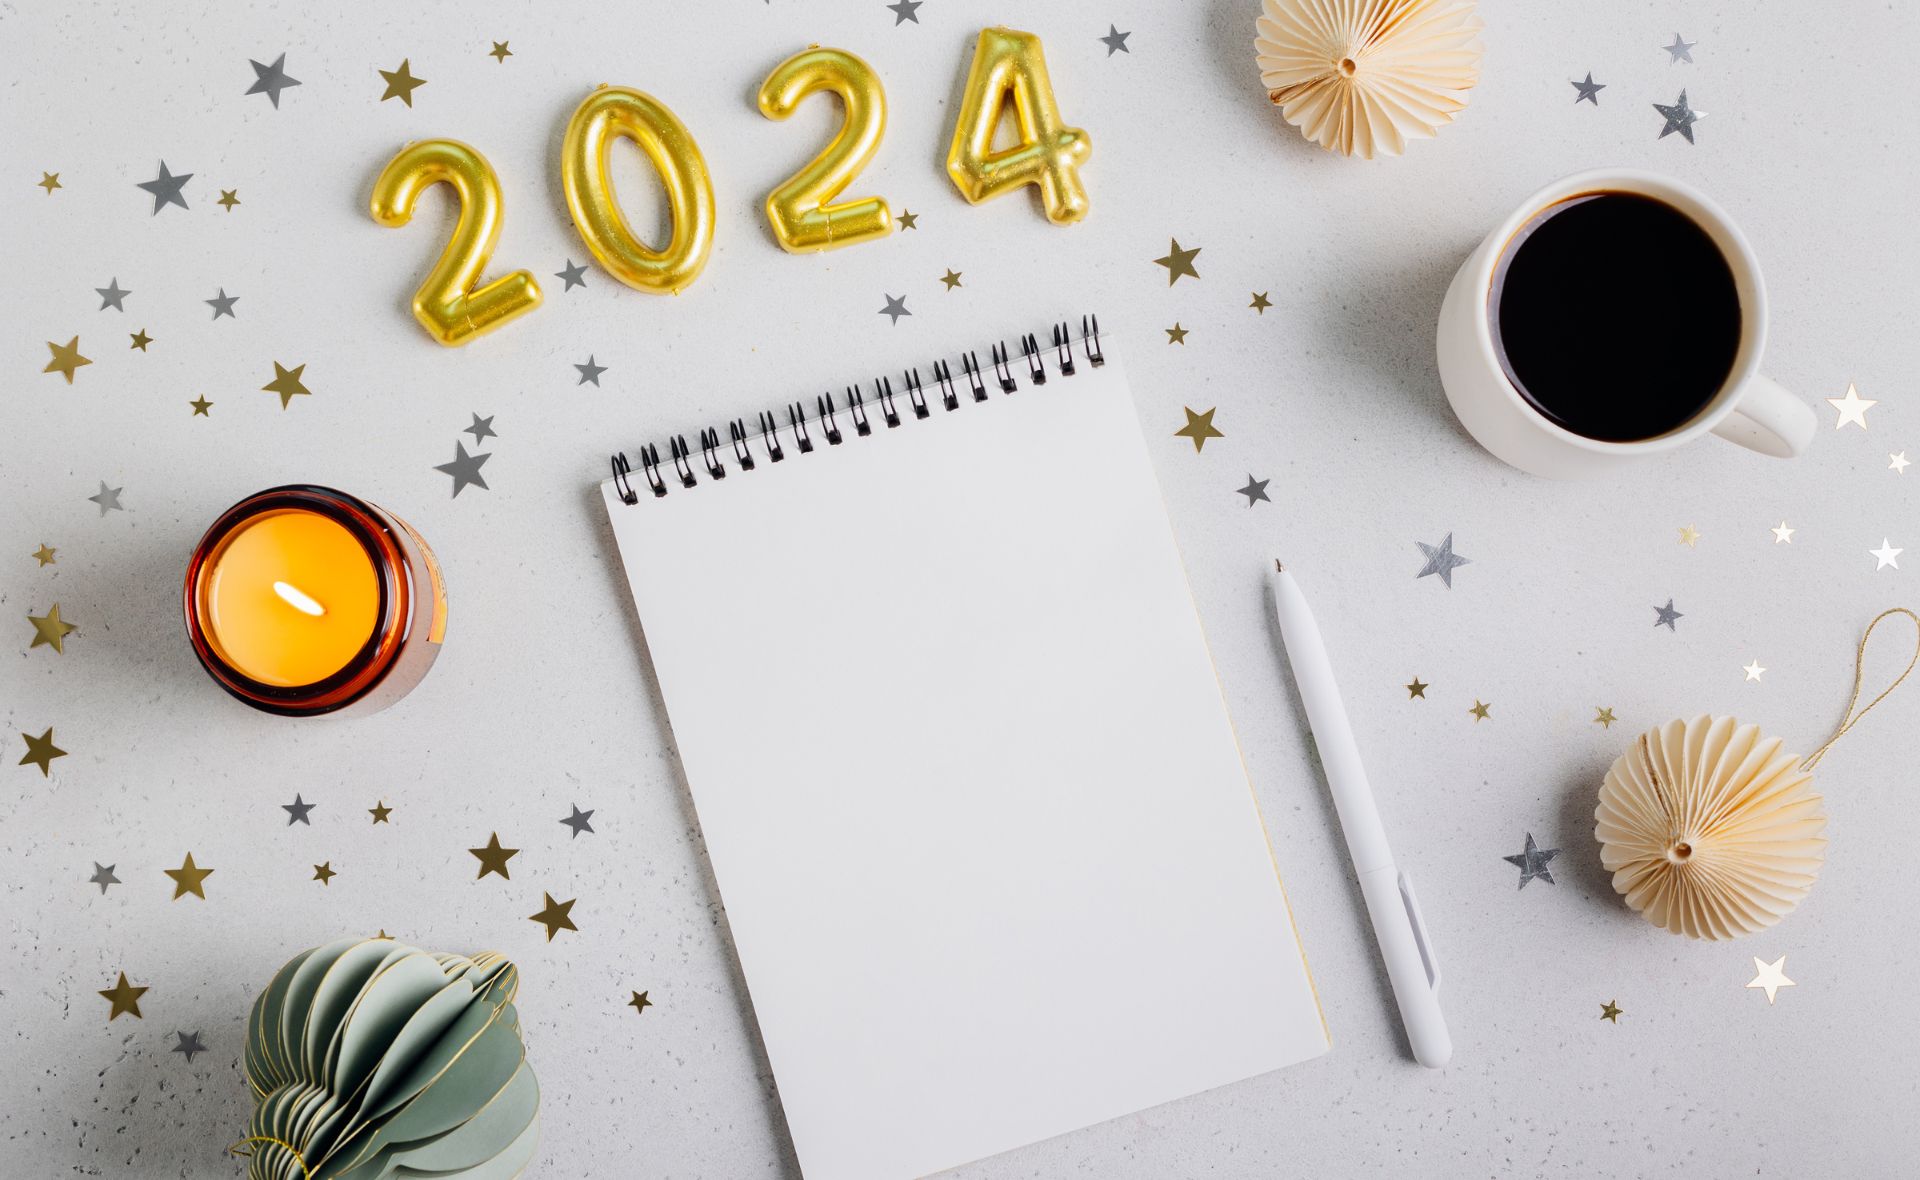 5 New Year’s resolutions you’ll actually want to keep